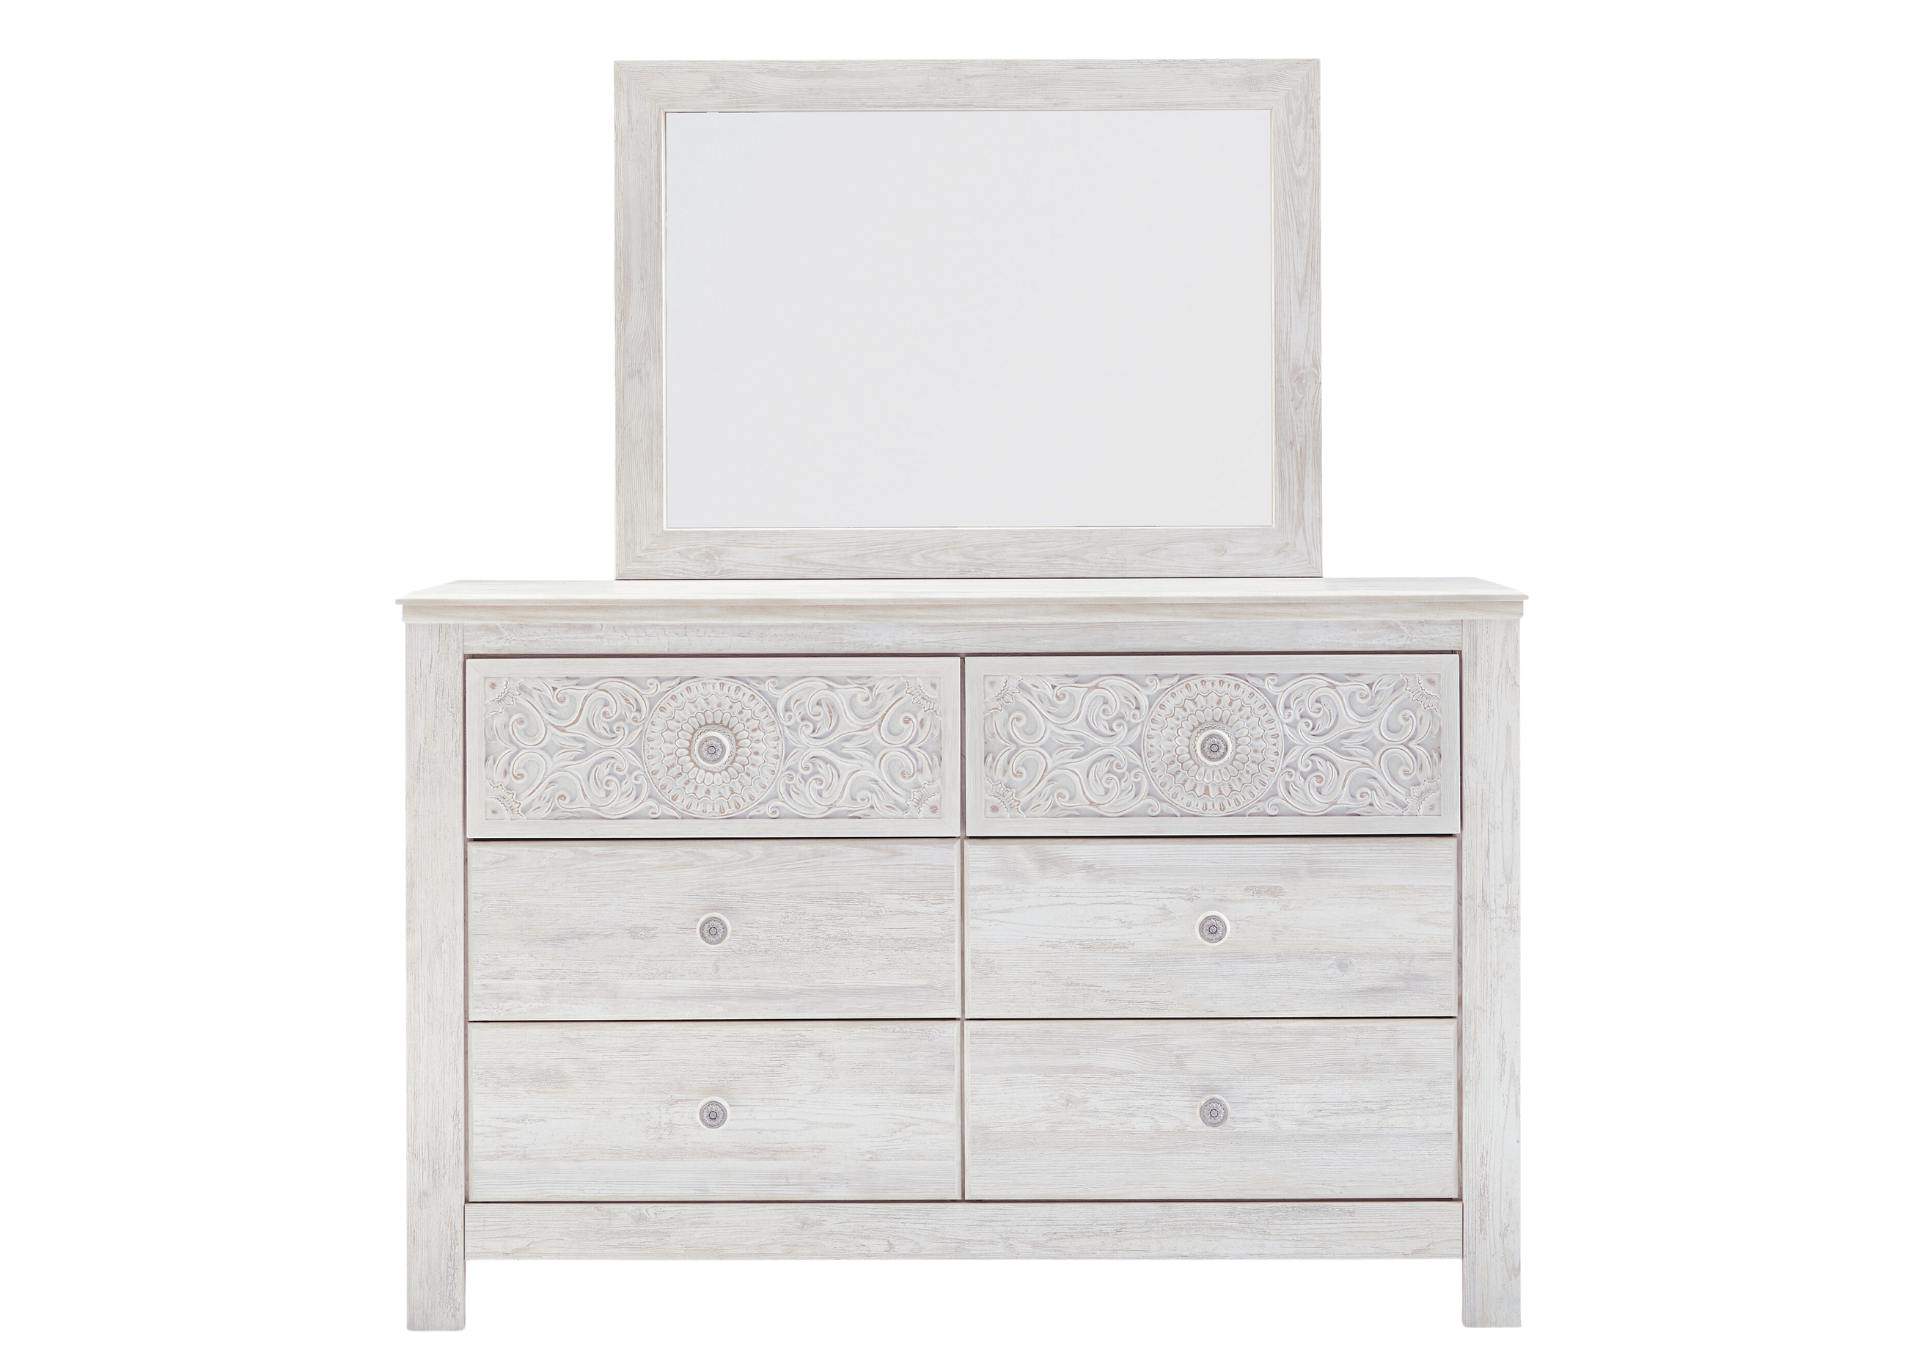 PAXBERRY DRESSER AND MIRROR,ASHLEY FURNITURE INC.